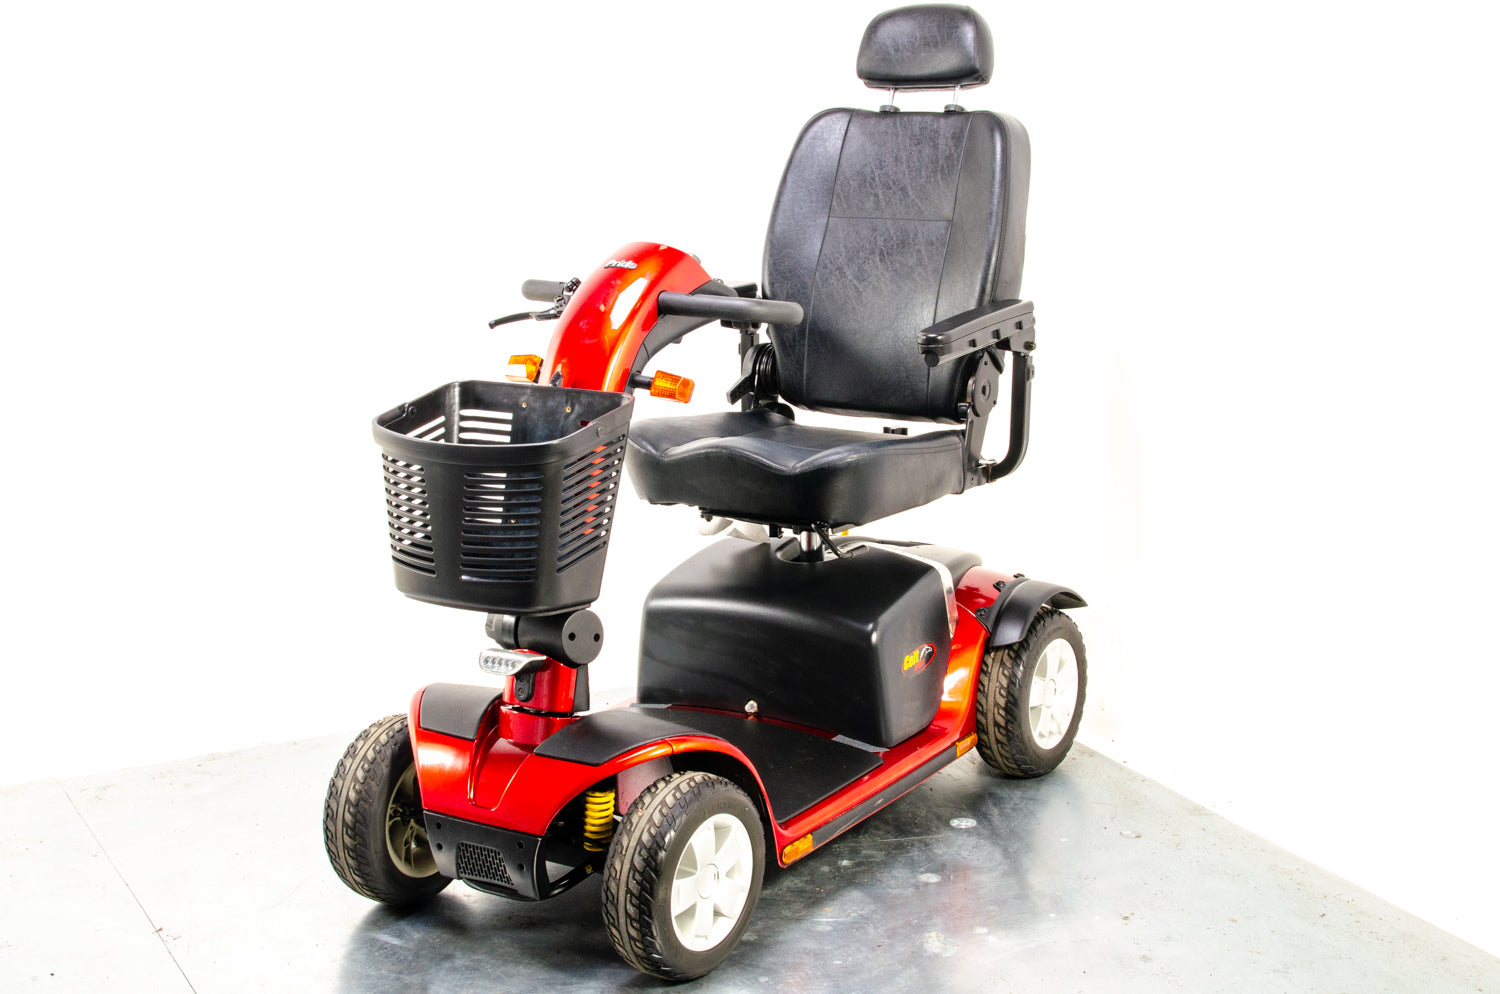 Pride Colt Sport Used Electric Mobility Scooter 8mph Transportable Suspension Pavement Road Legal Red 13503